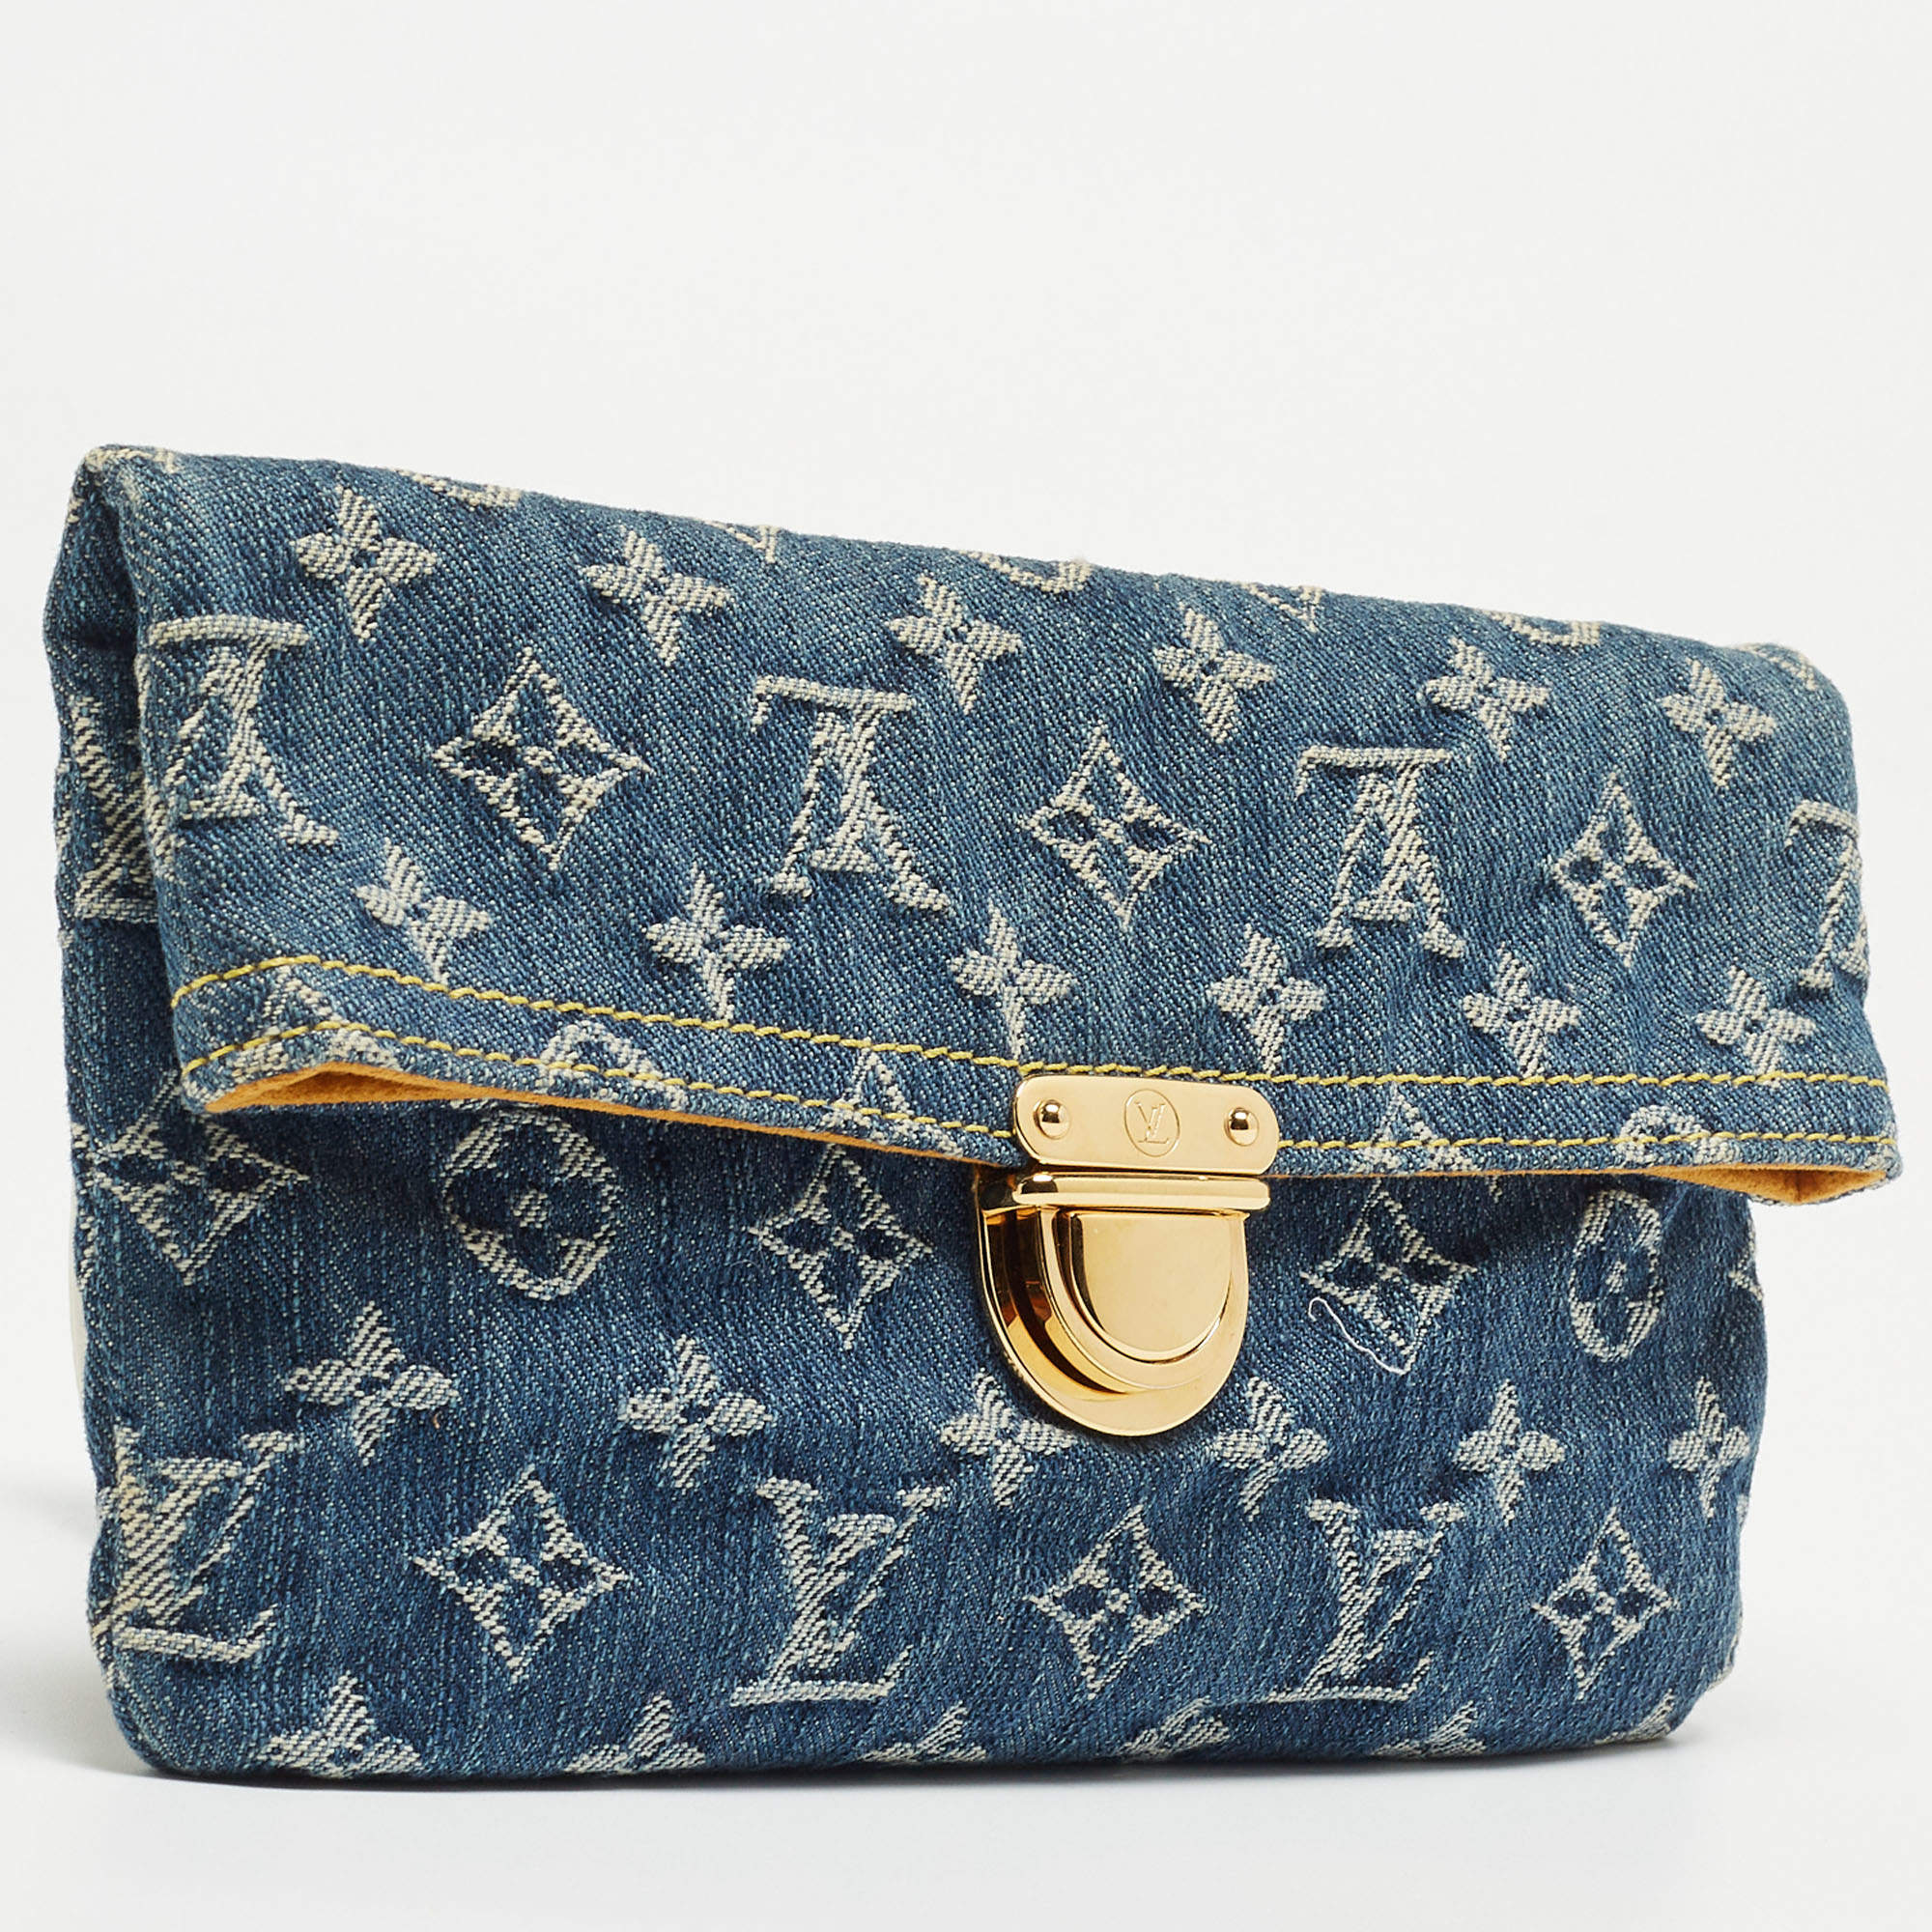 Louis Vuitton Pre-owned Women's Clutch Bag - Navy - One Size